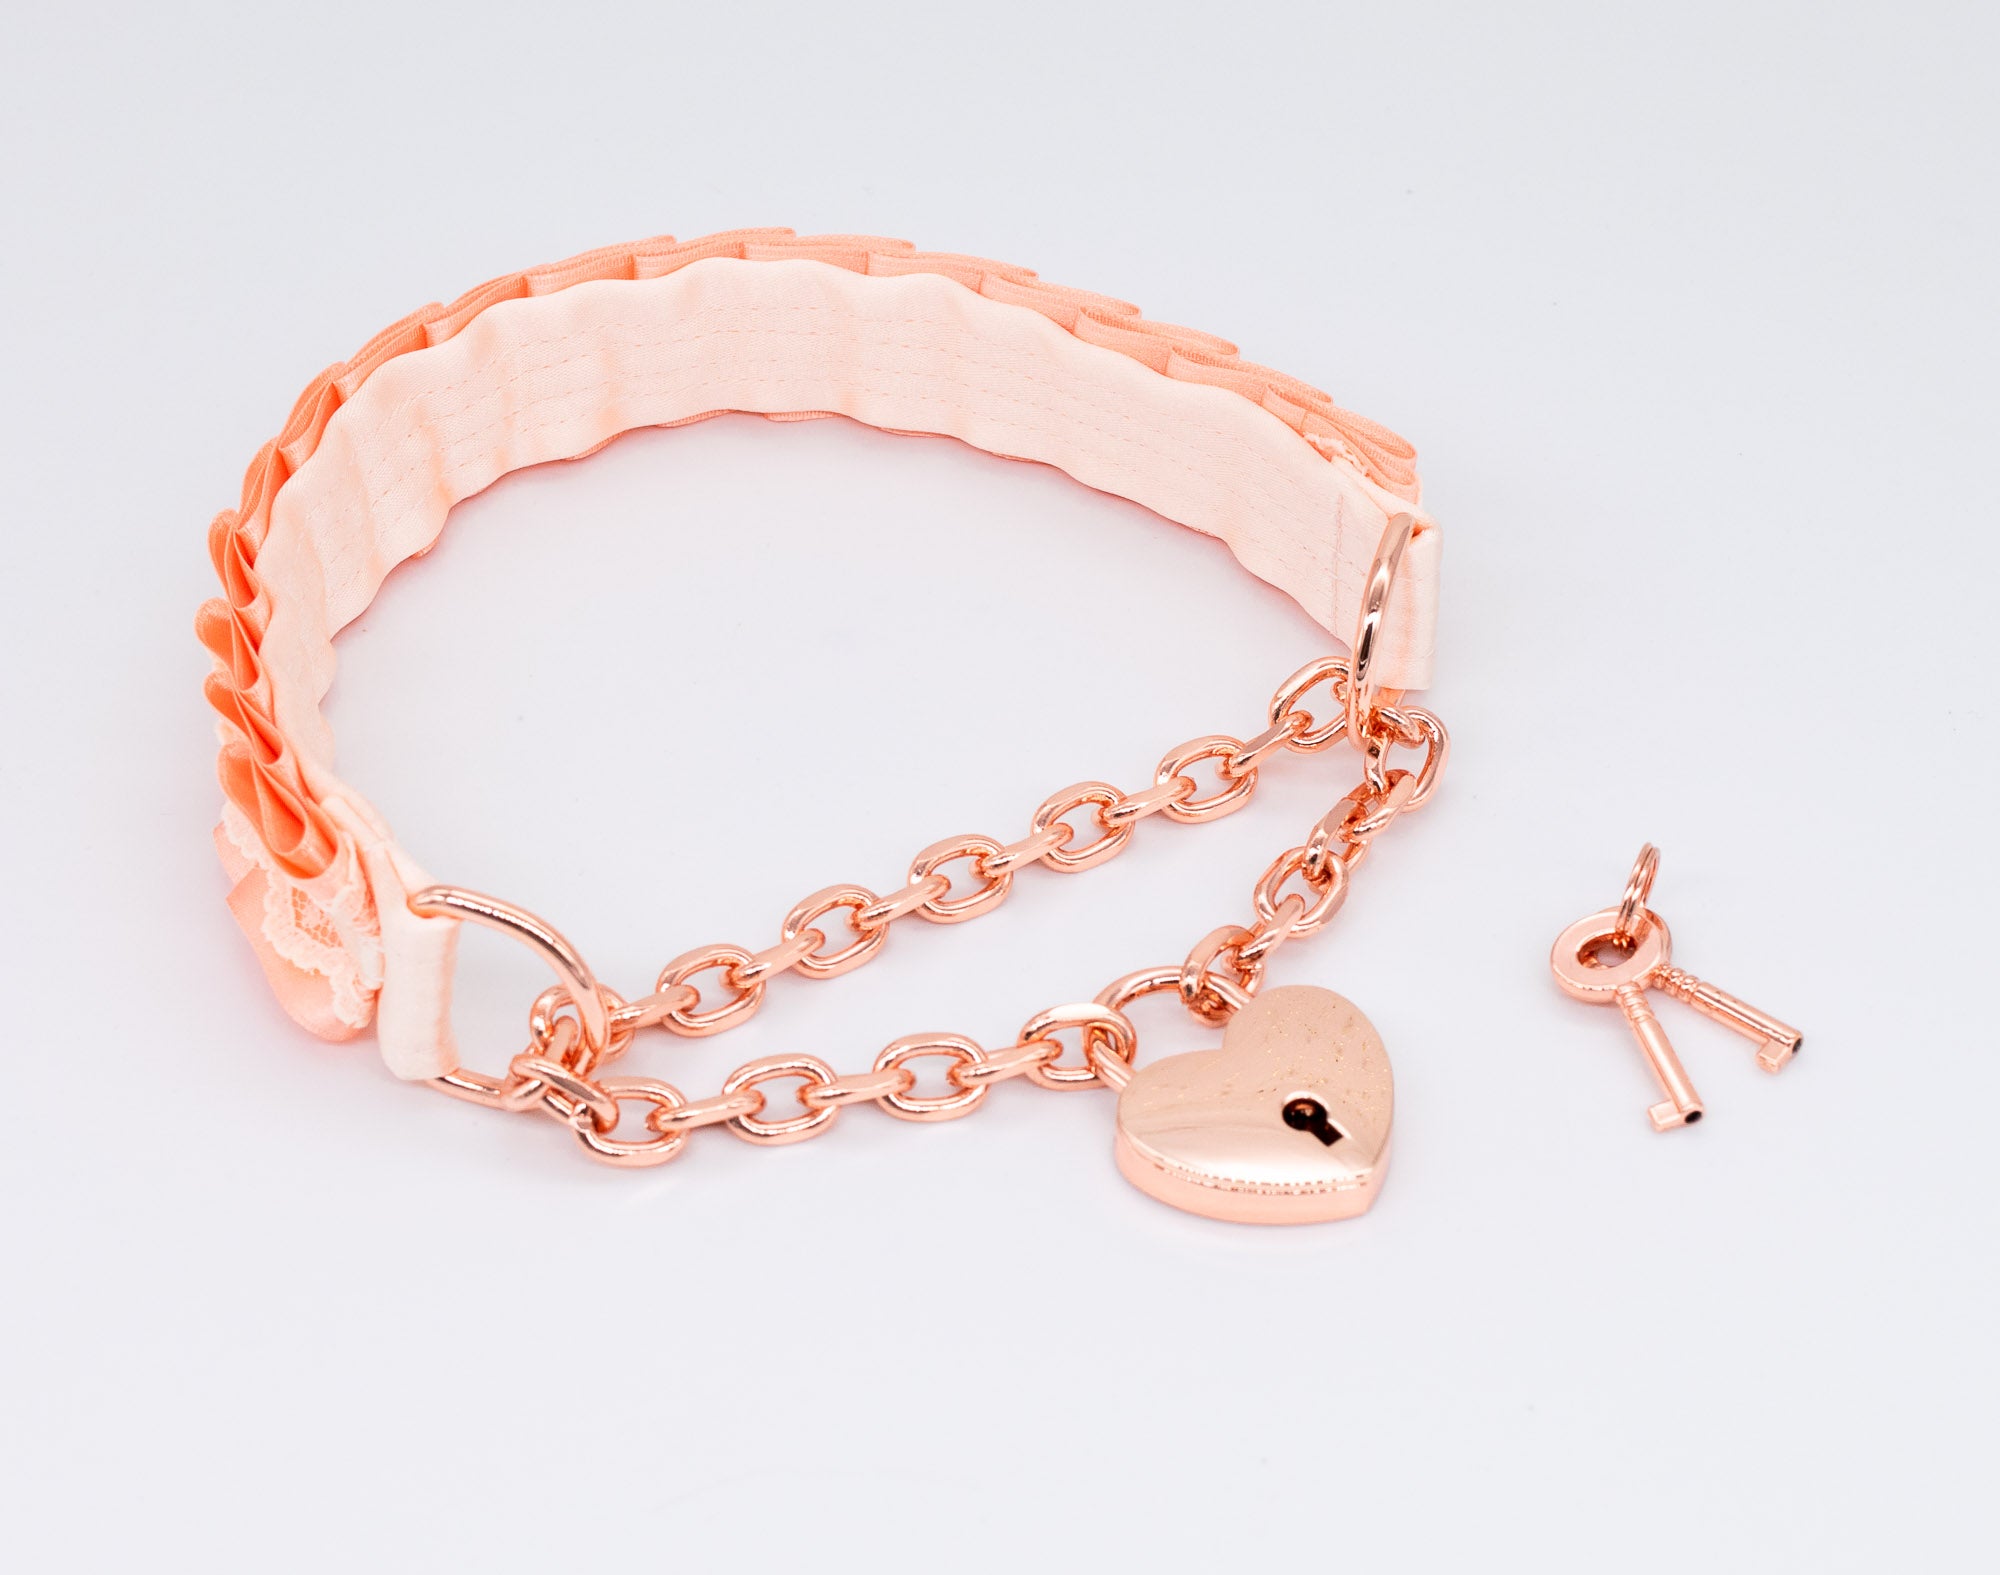 Peach and Cream Lace Front-Locking Martingale BDSM Collar in Rose Gold